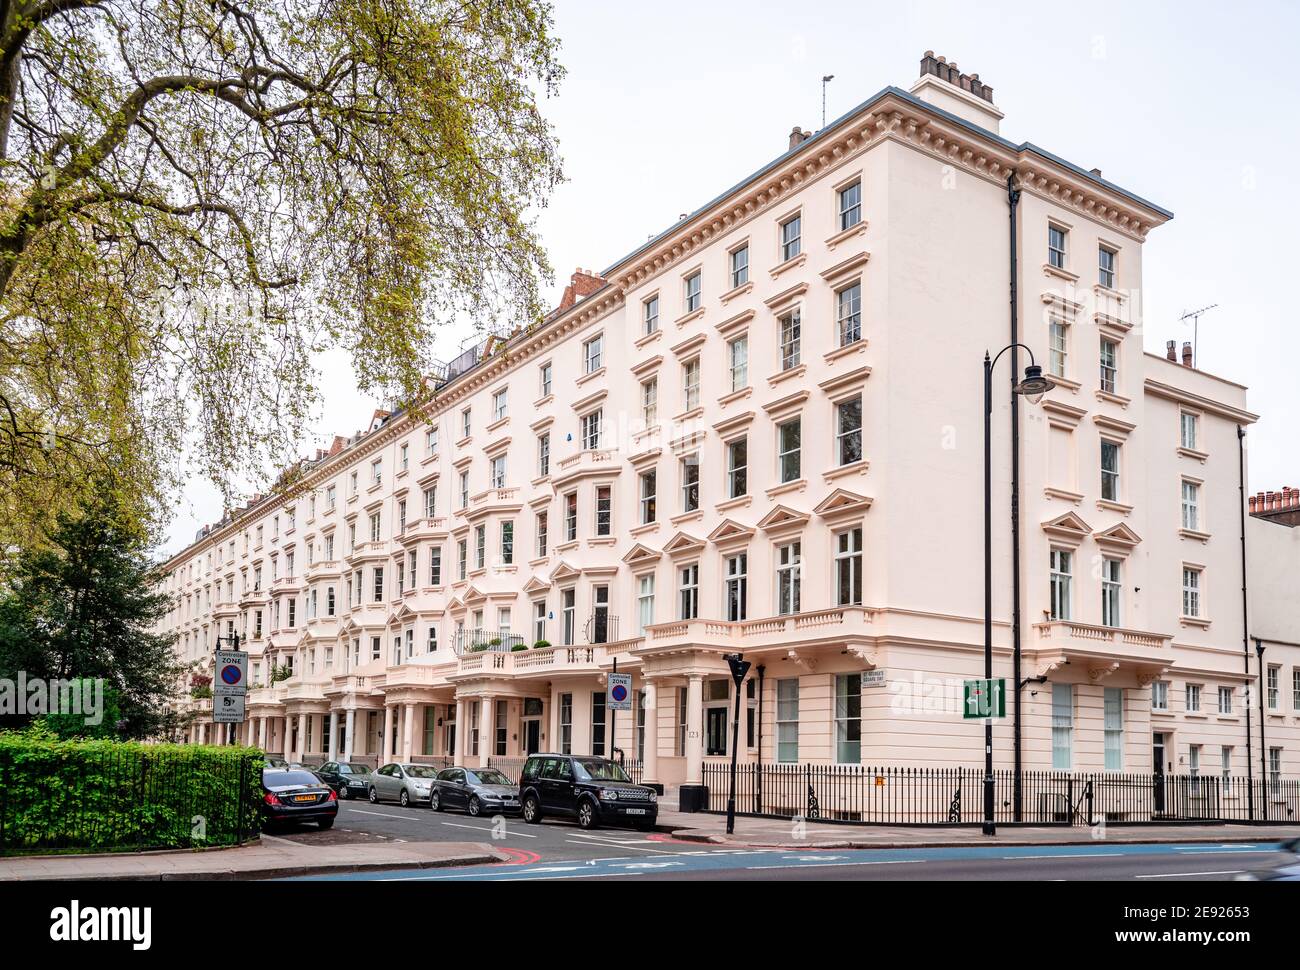 View of the junction of Grosvenor Rd and St George's Square, with tall white old terraced houses. Pimlico, City of Westminster, London, UK. Stock Photo